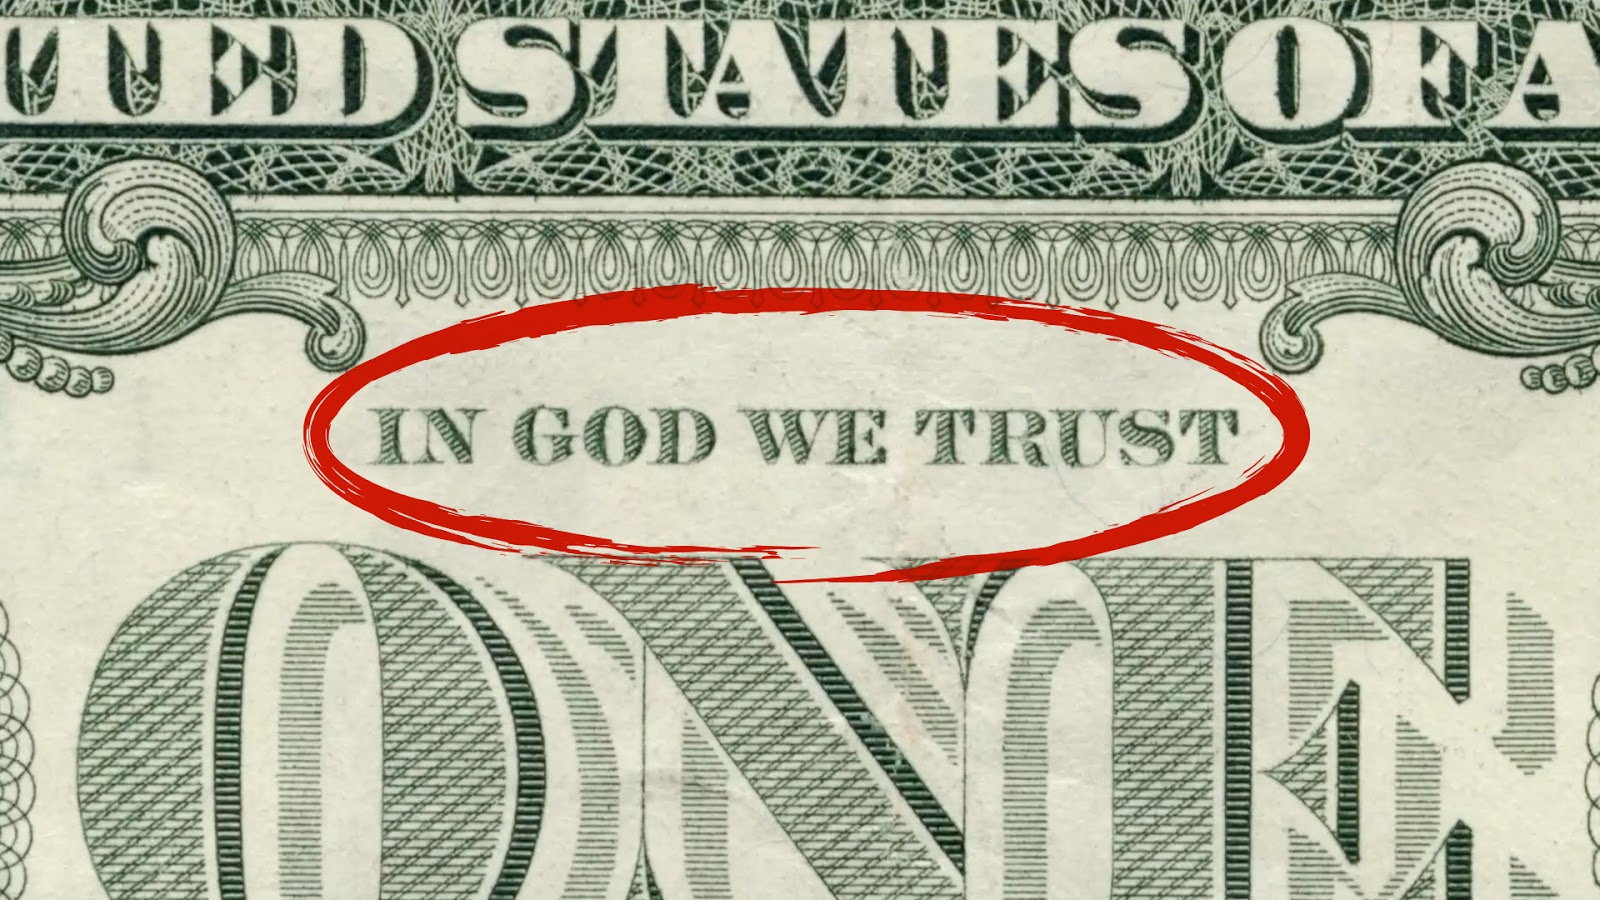 Dollars out on top on god. In God we Trust доллар купюра. In God we Trust на долларе. Надпись на долларе. Надпись на долларе in God we.